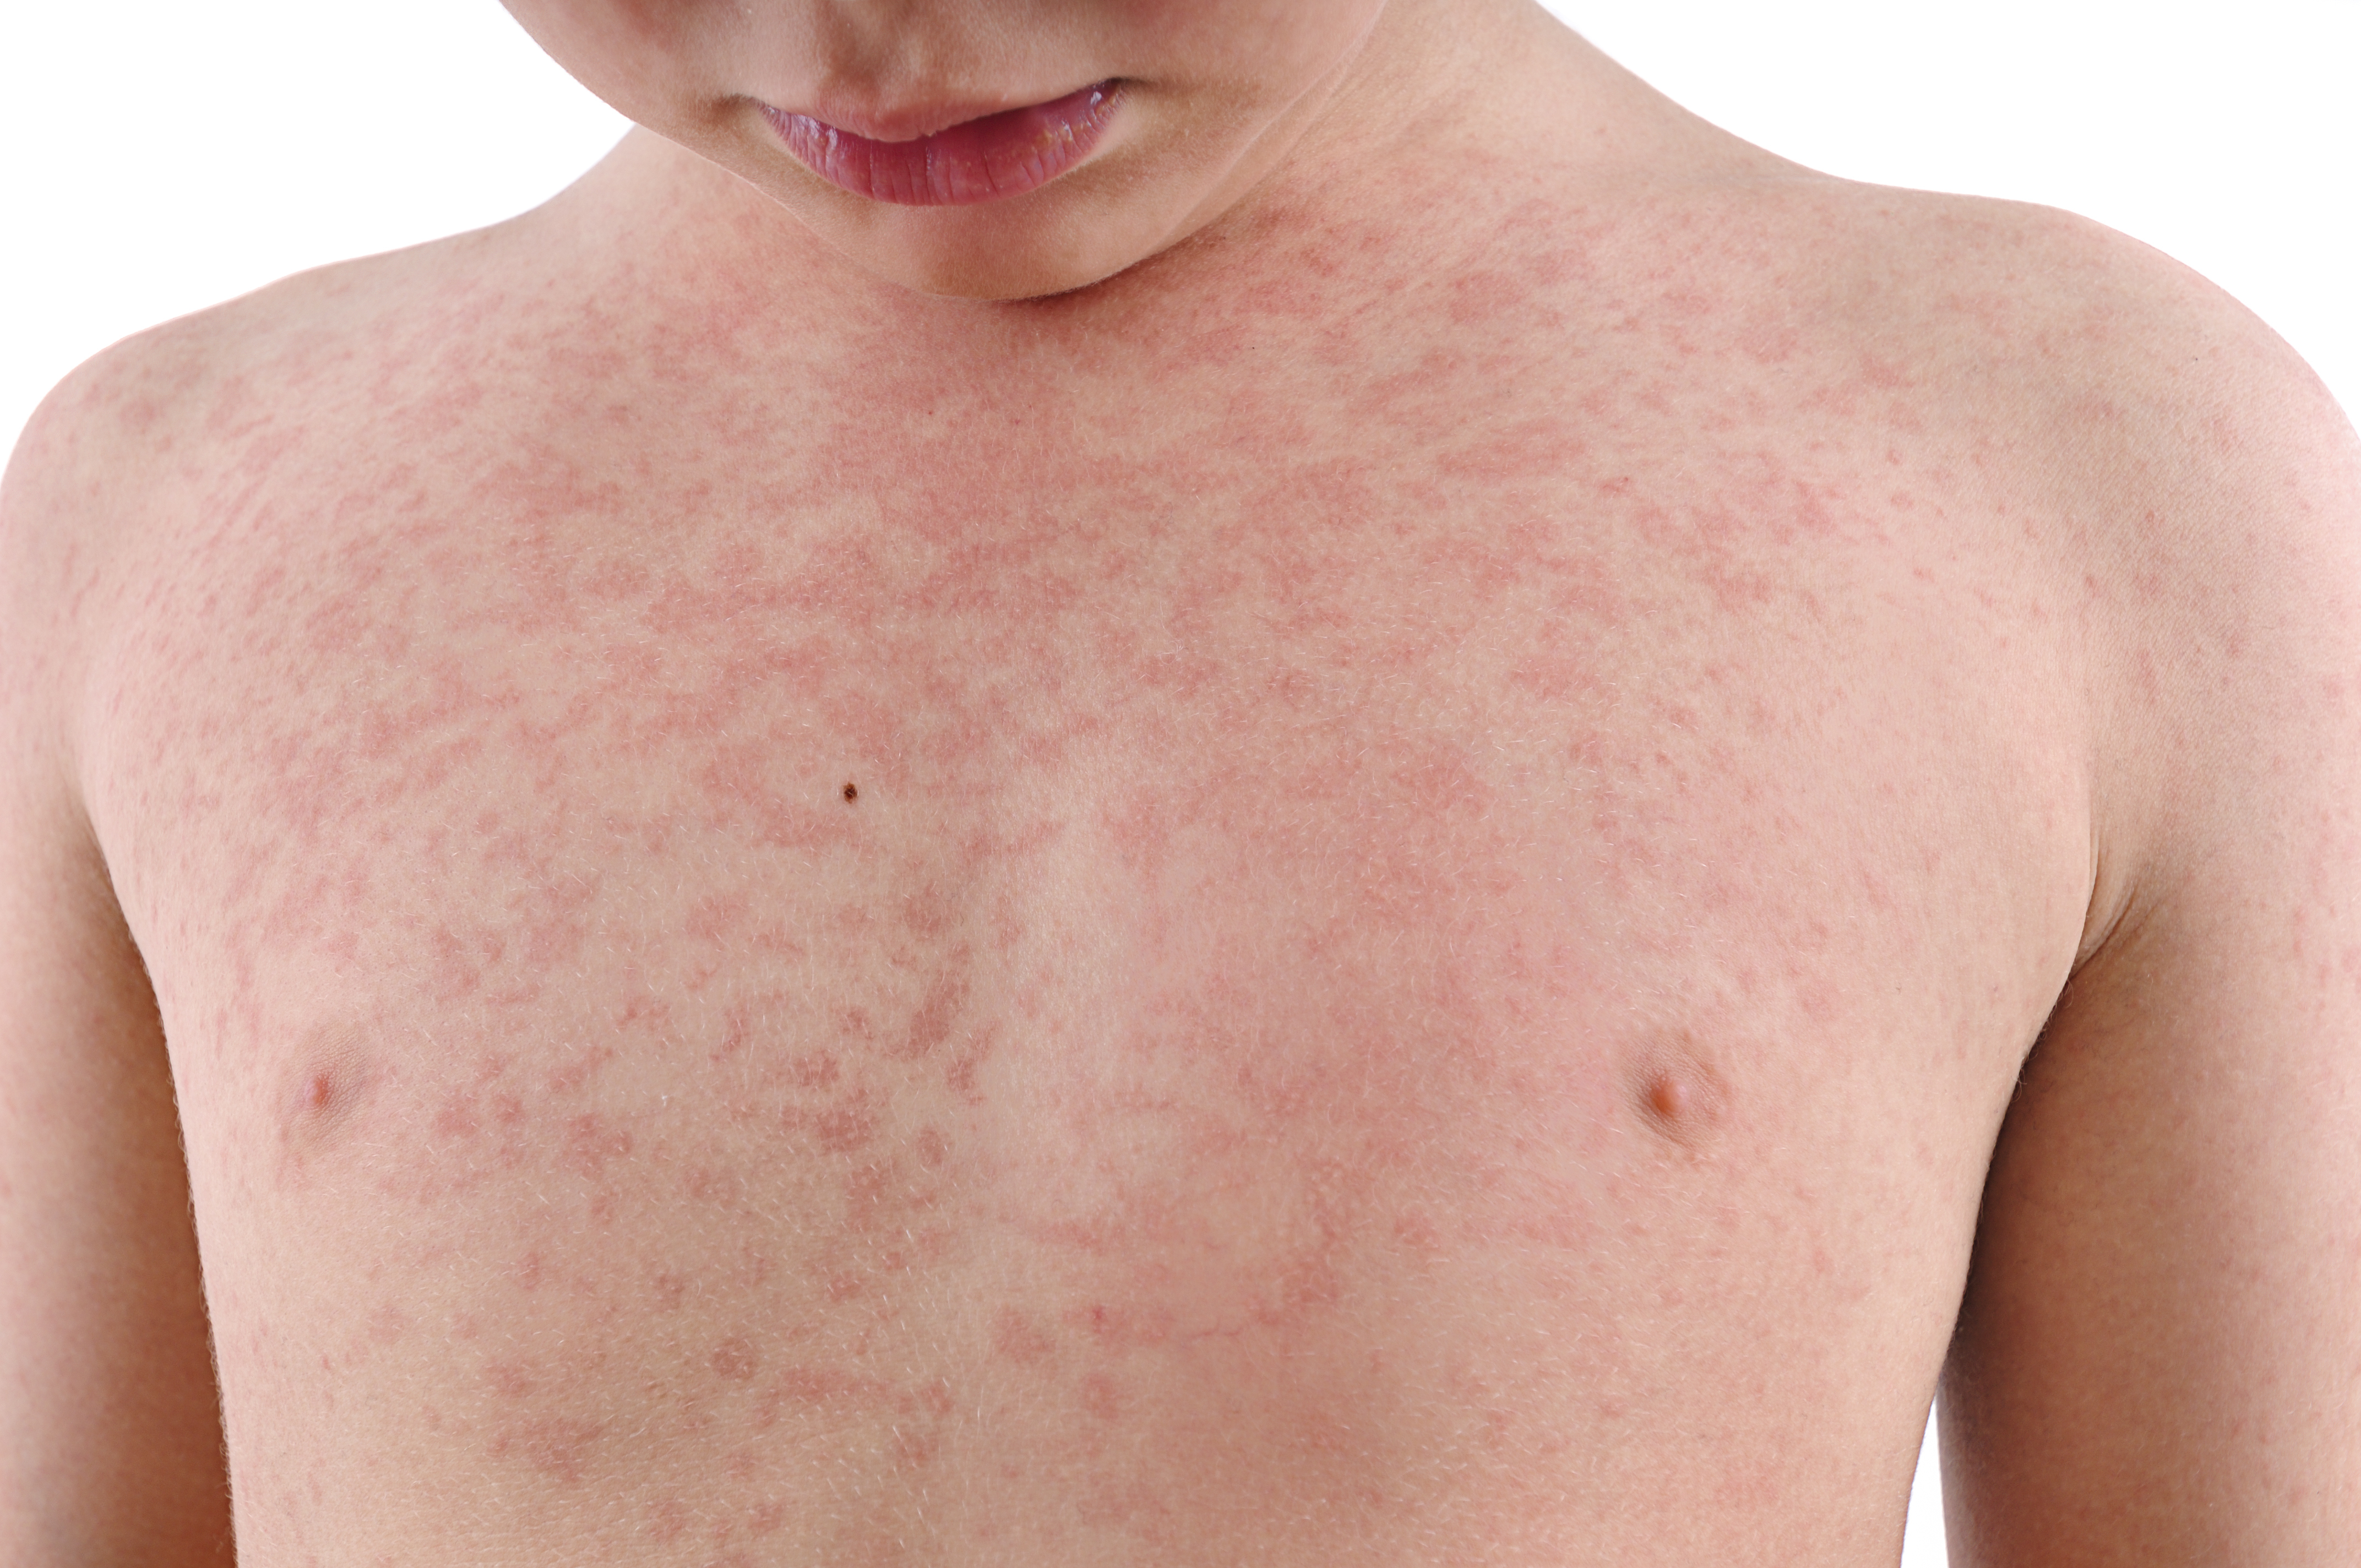 Plagued by a summer rash? How to tell if it's heat rash or